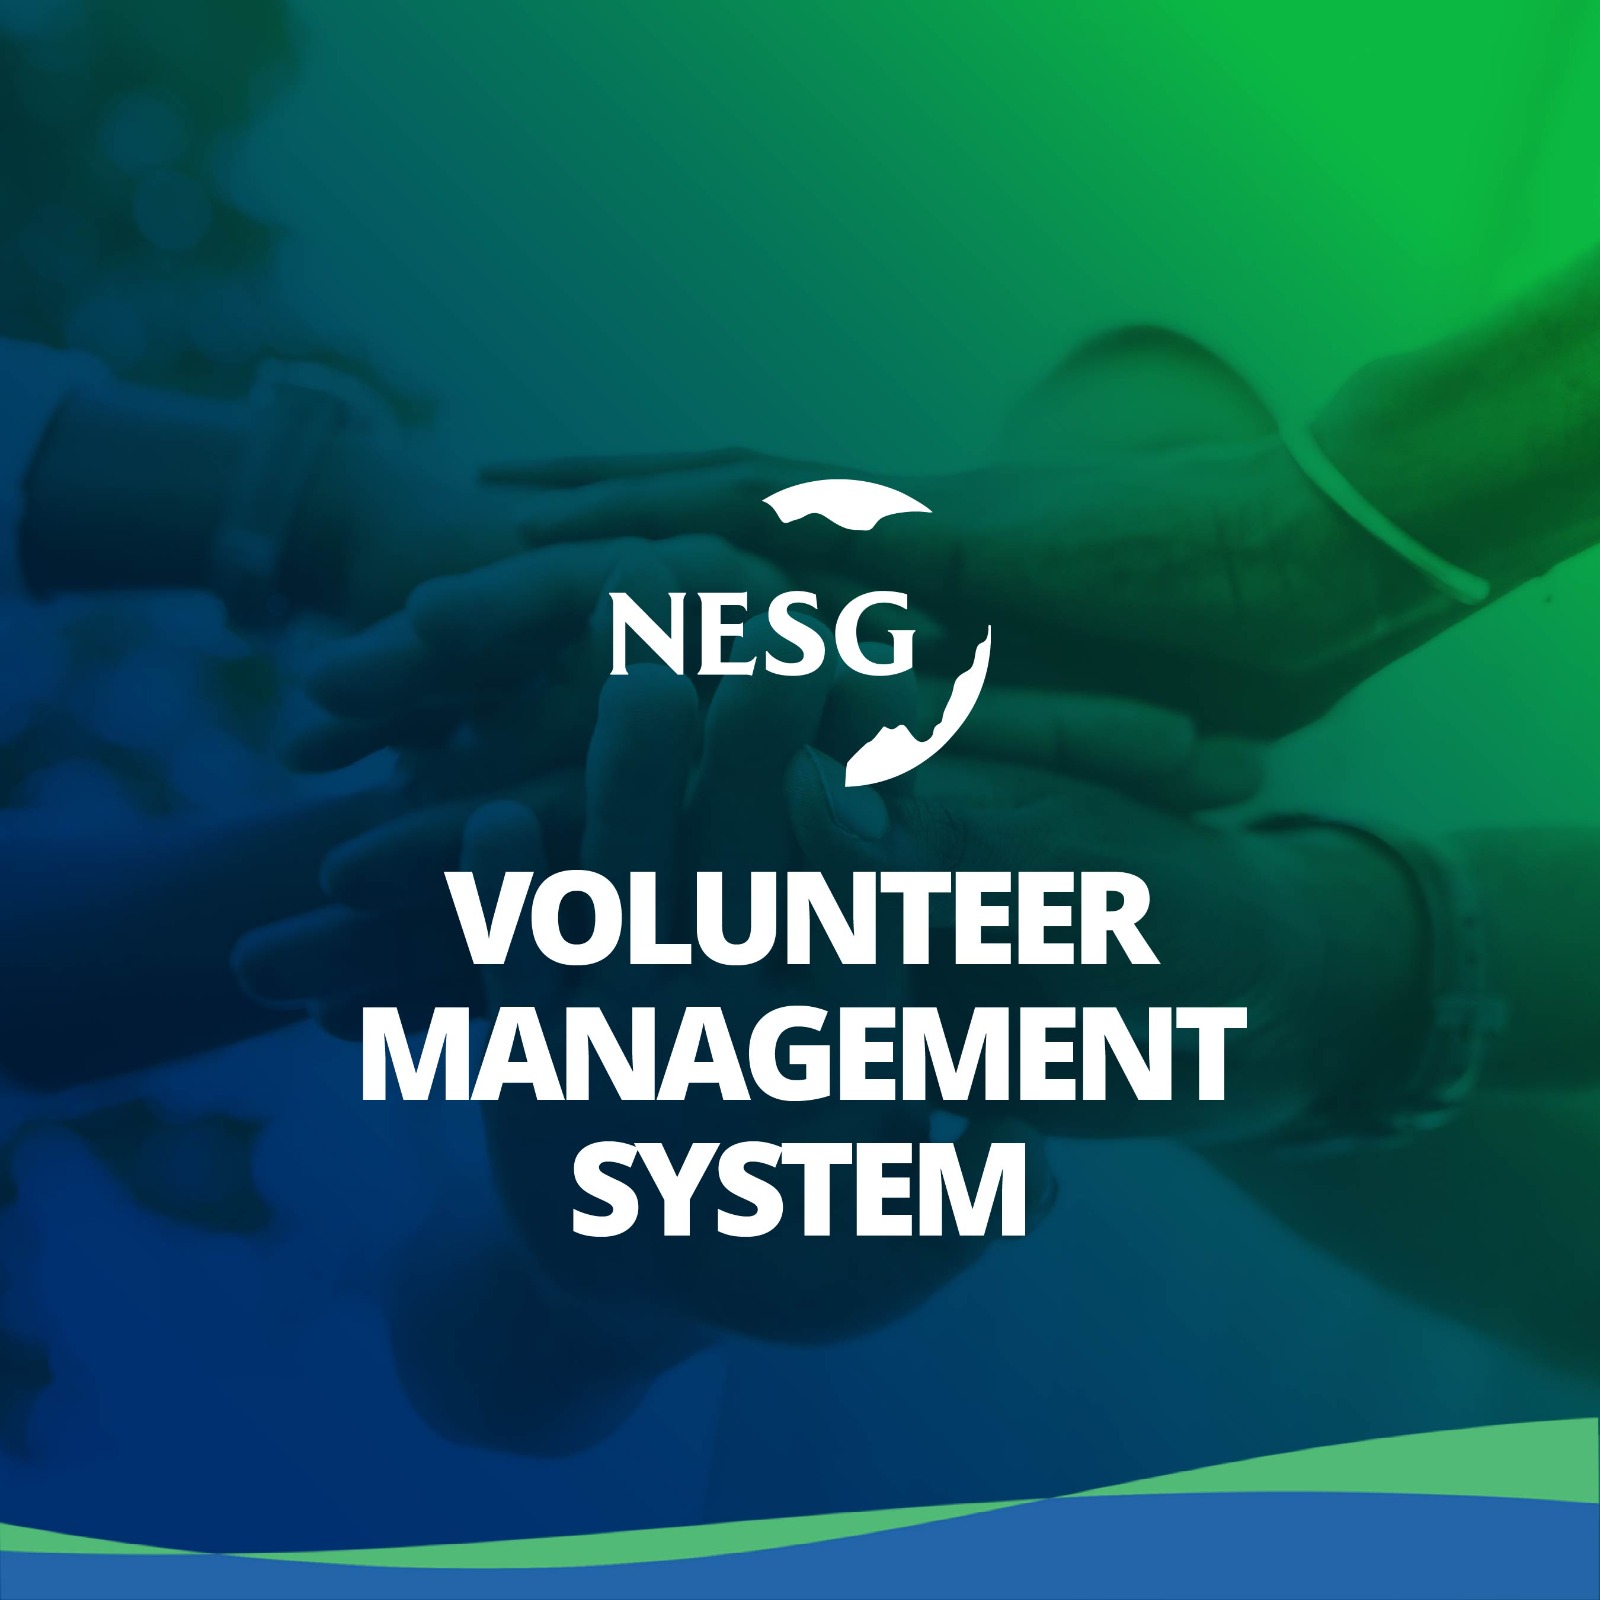 Introducing the NESG Volunteer Management System